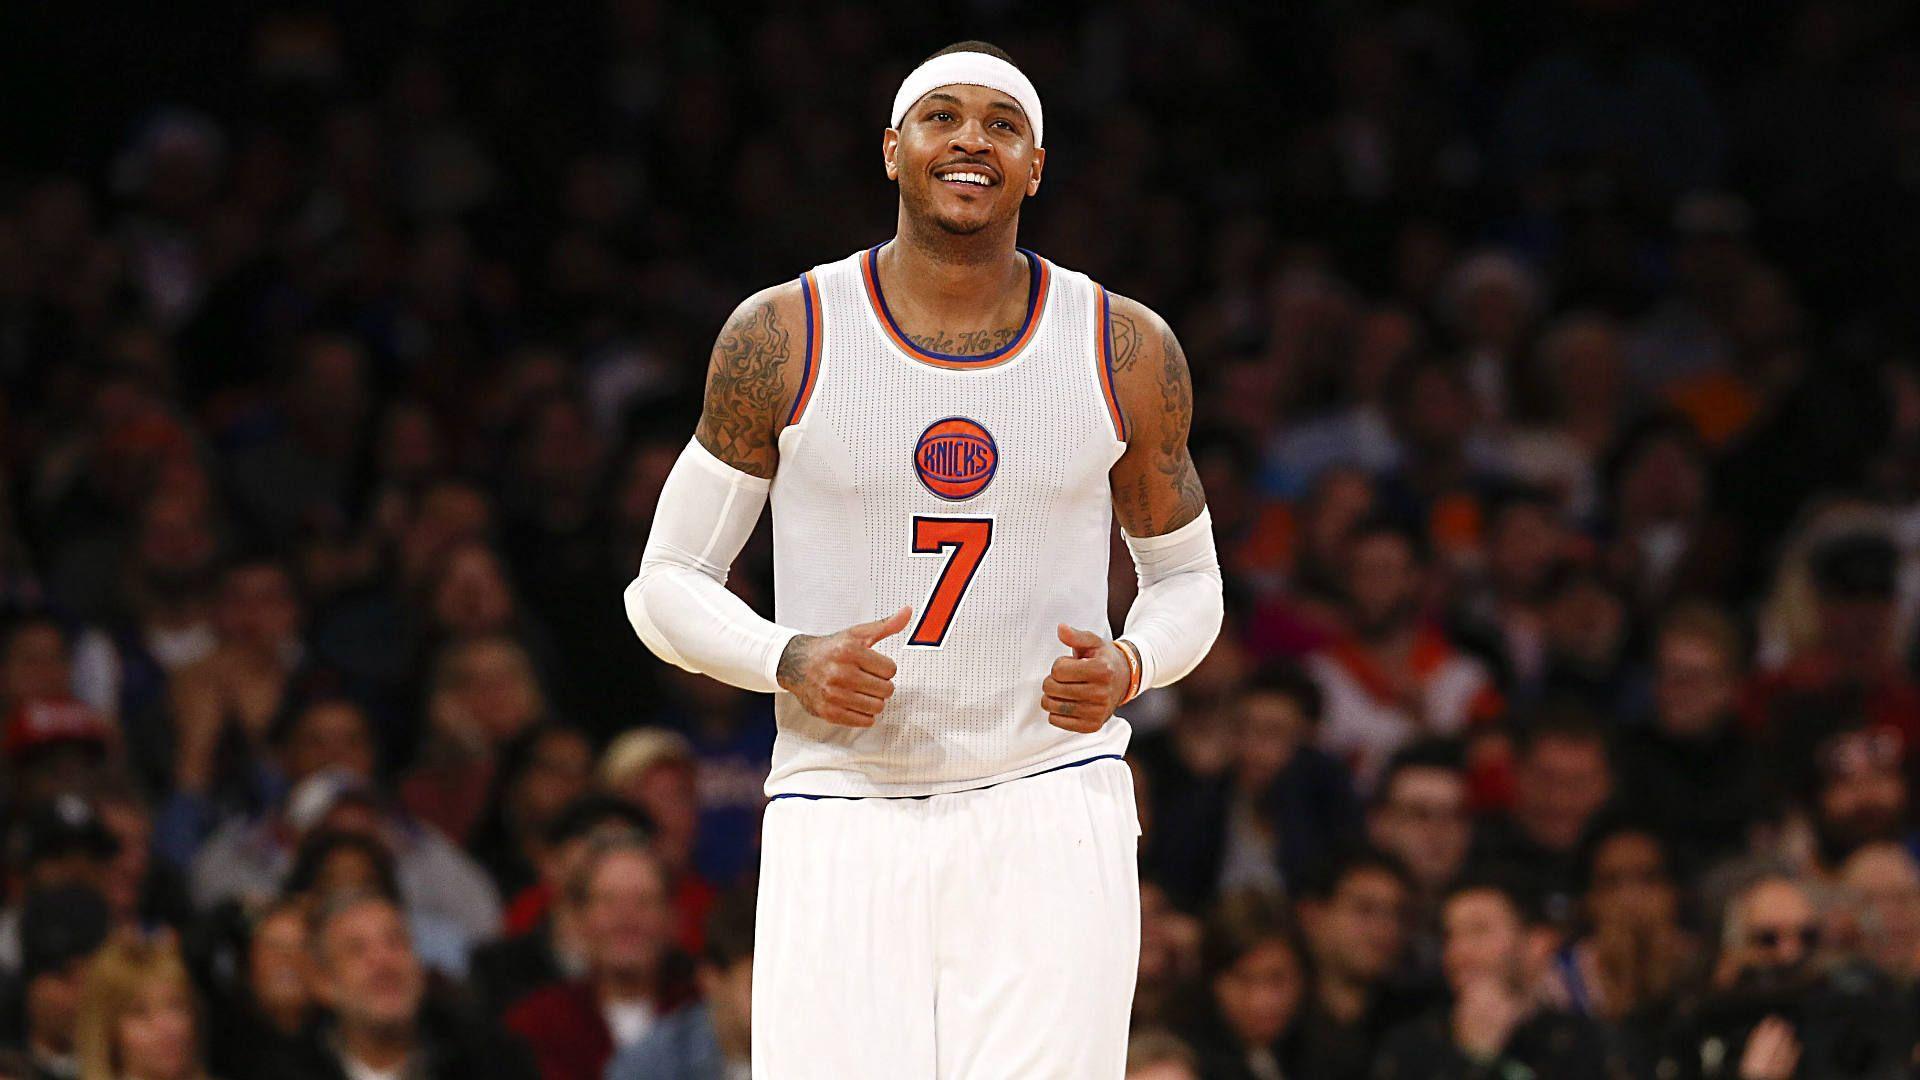 A winter of discontent for Melo, but a hopeful tone on Knicks&; future